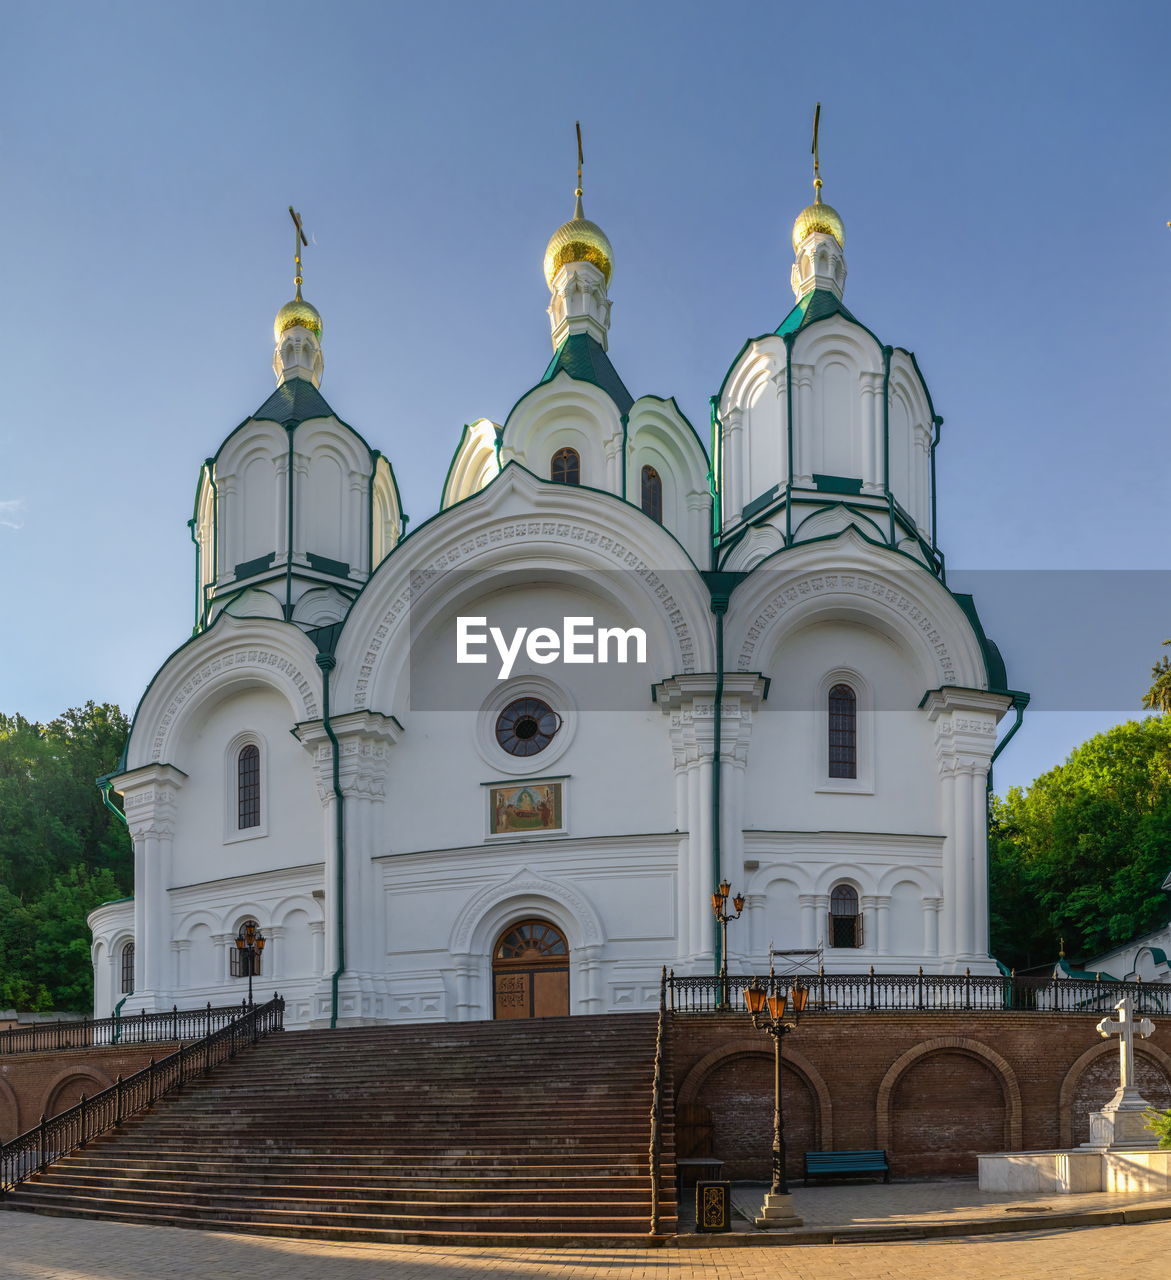 Assumption cathedral on the territory of the svyatogorsk lavra in ukraine, on a sunny summer morning